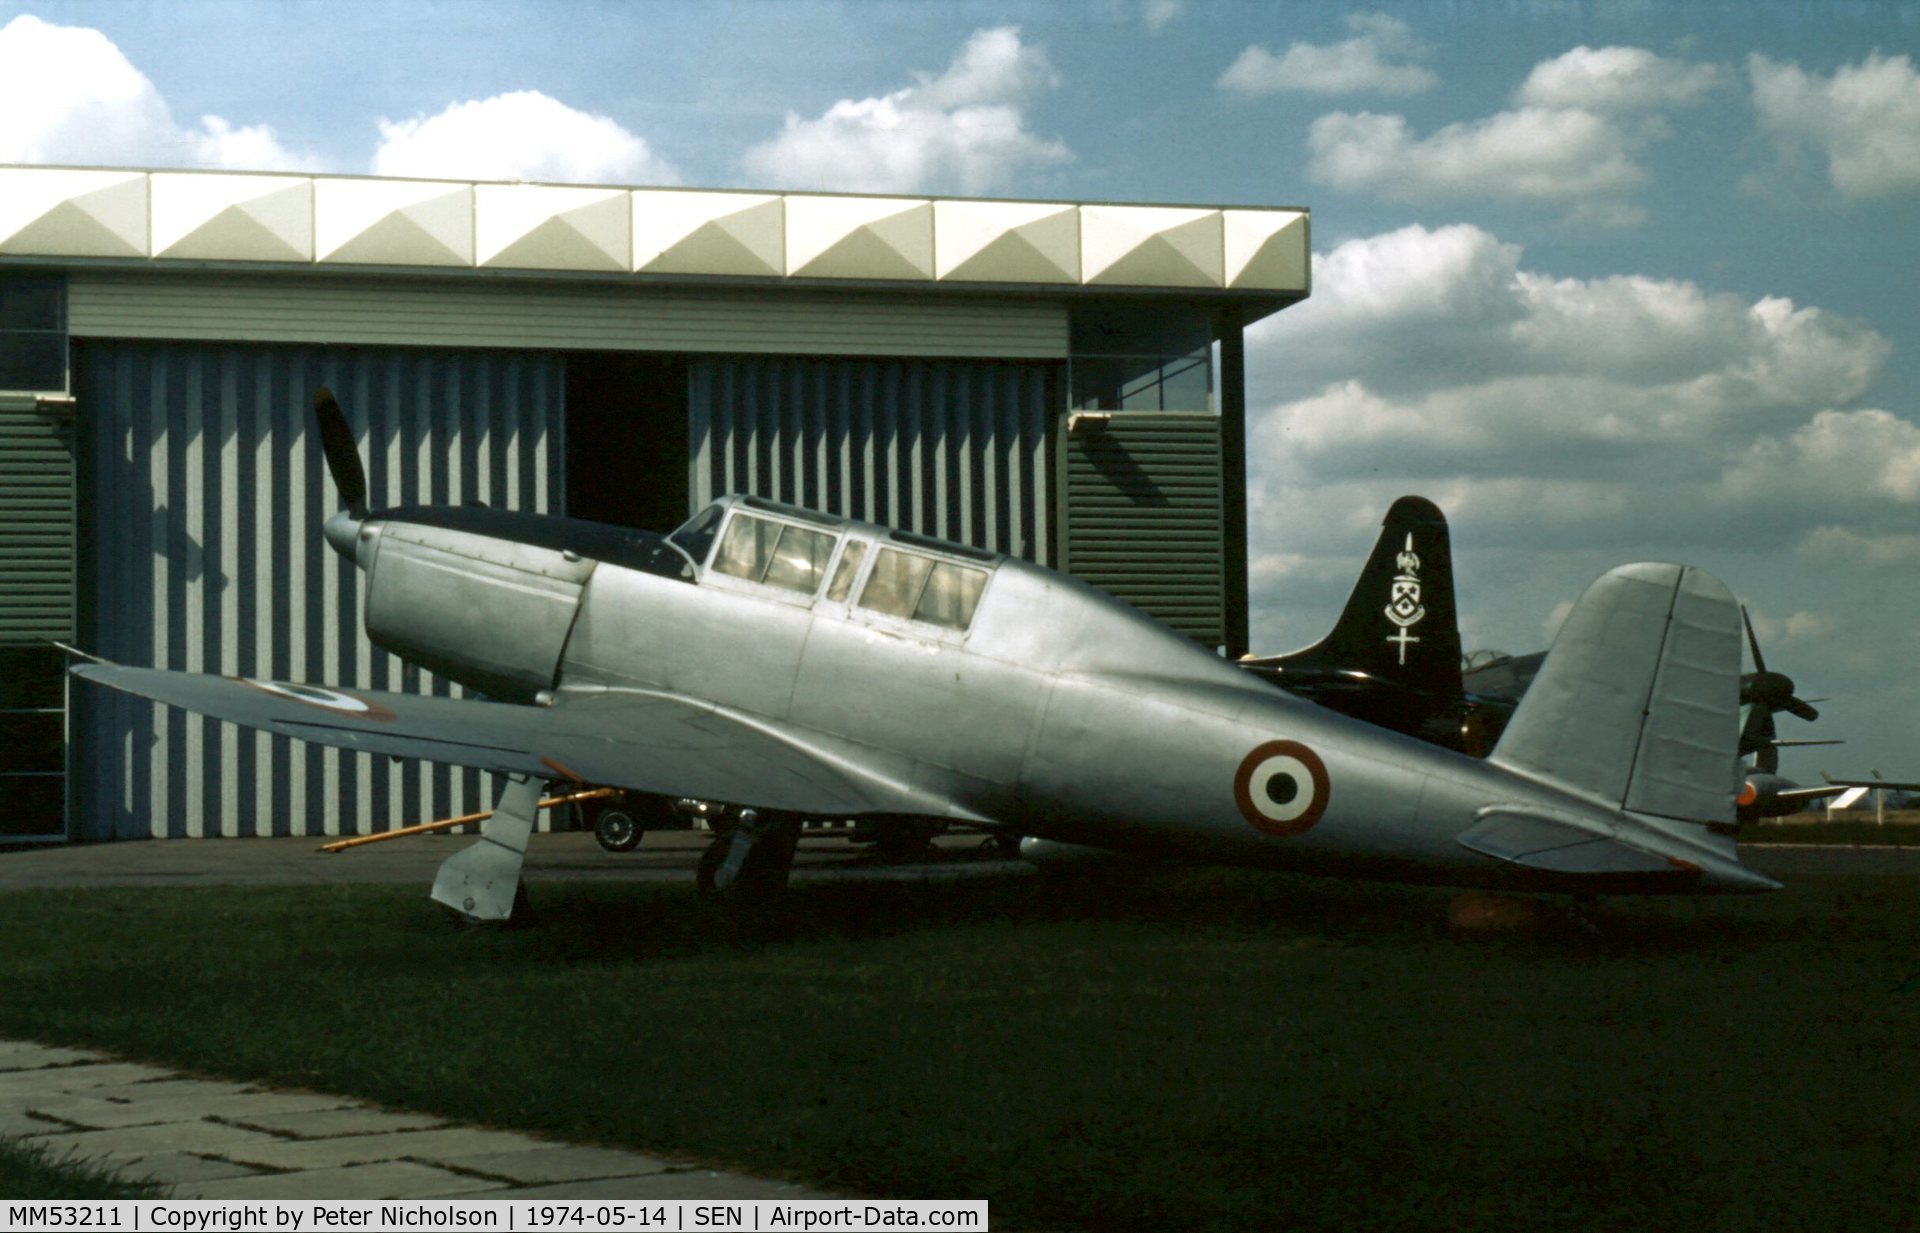 MM53211, Fiat G.46-4B C/N 71, Ex-Italian Air Force basic trainer at the Historic Aircraft Museum at Southend Airport.